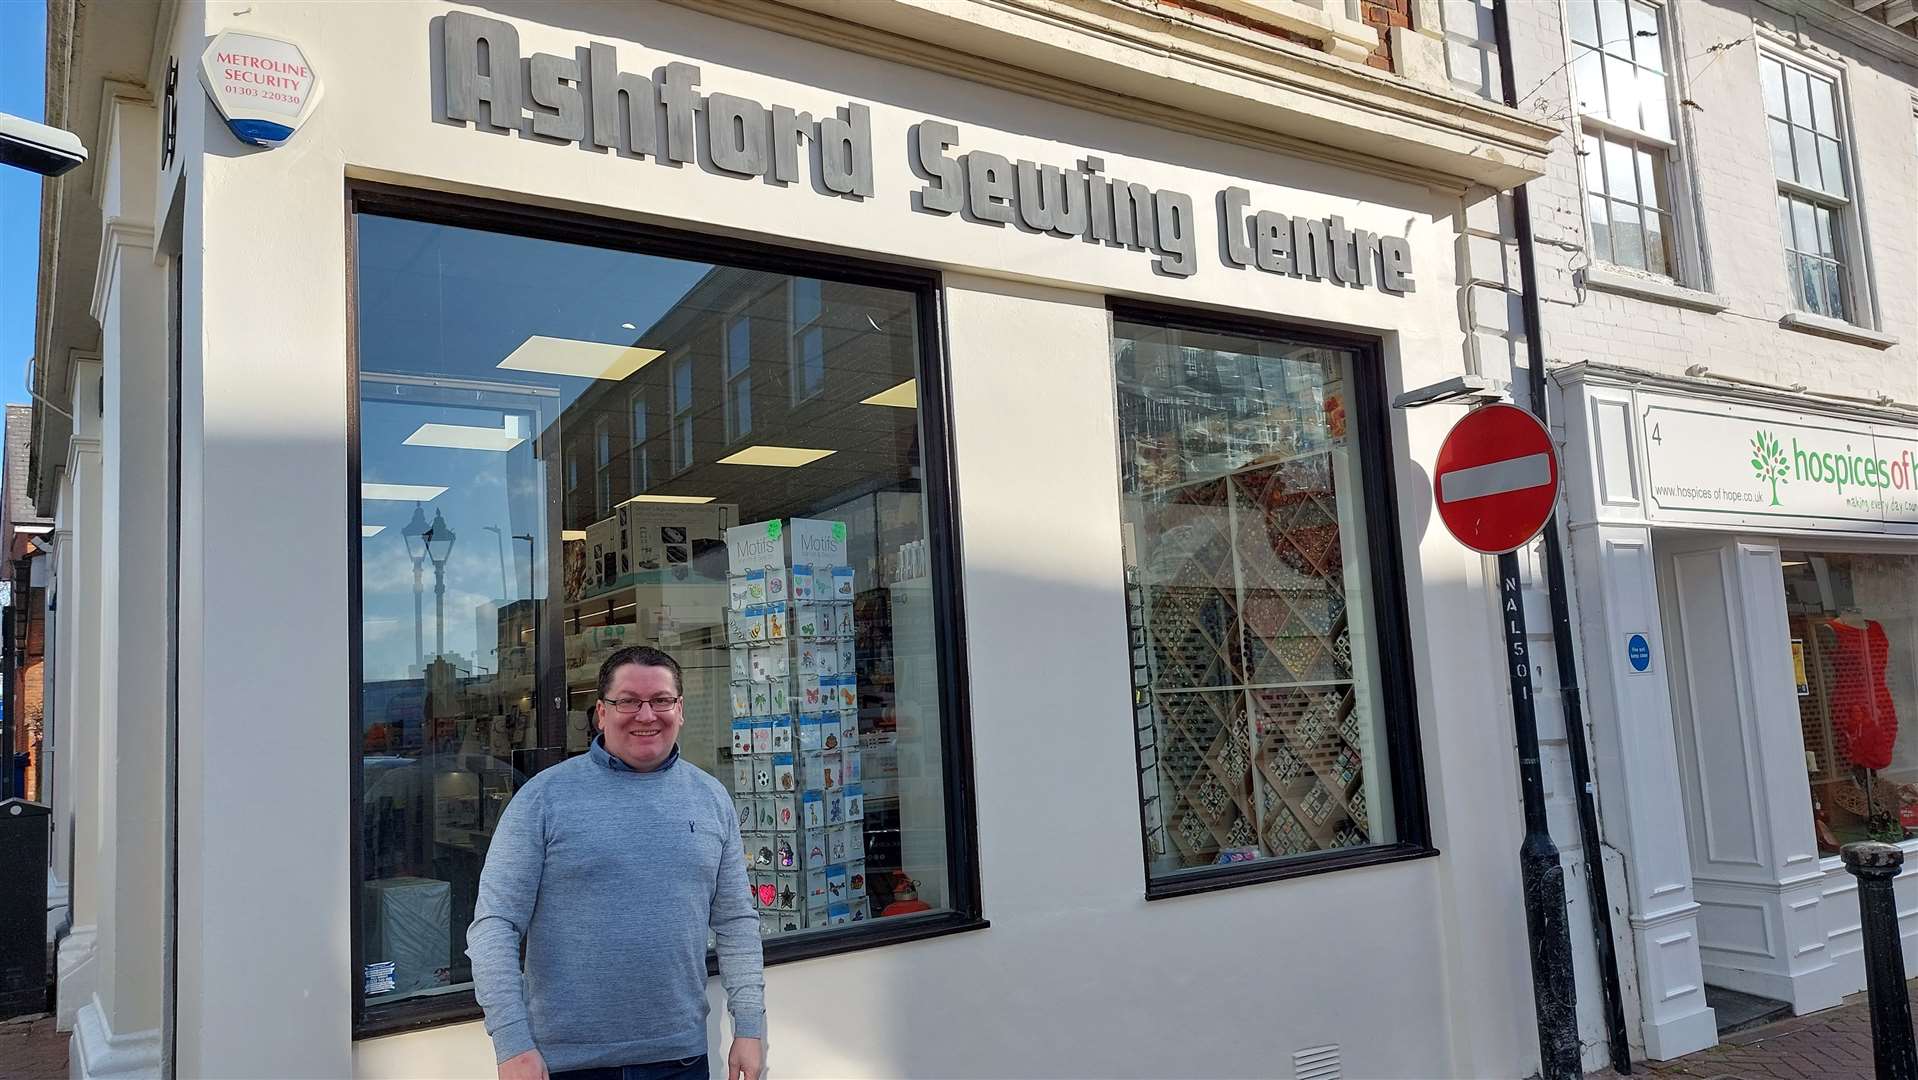 Kevin Webb outside the Ashford Sewing Centre